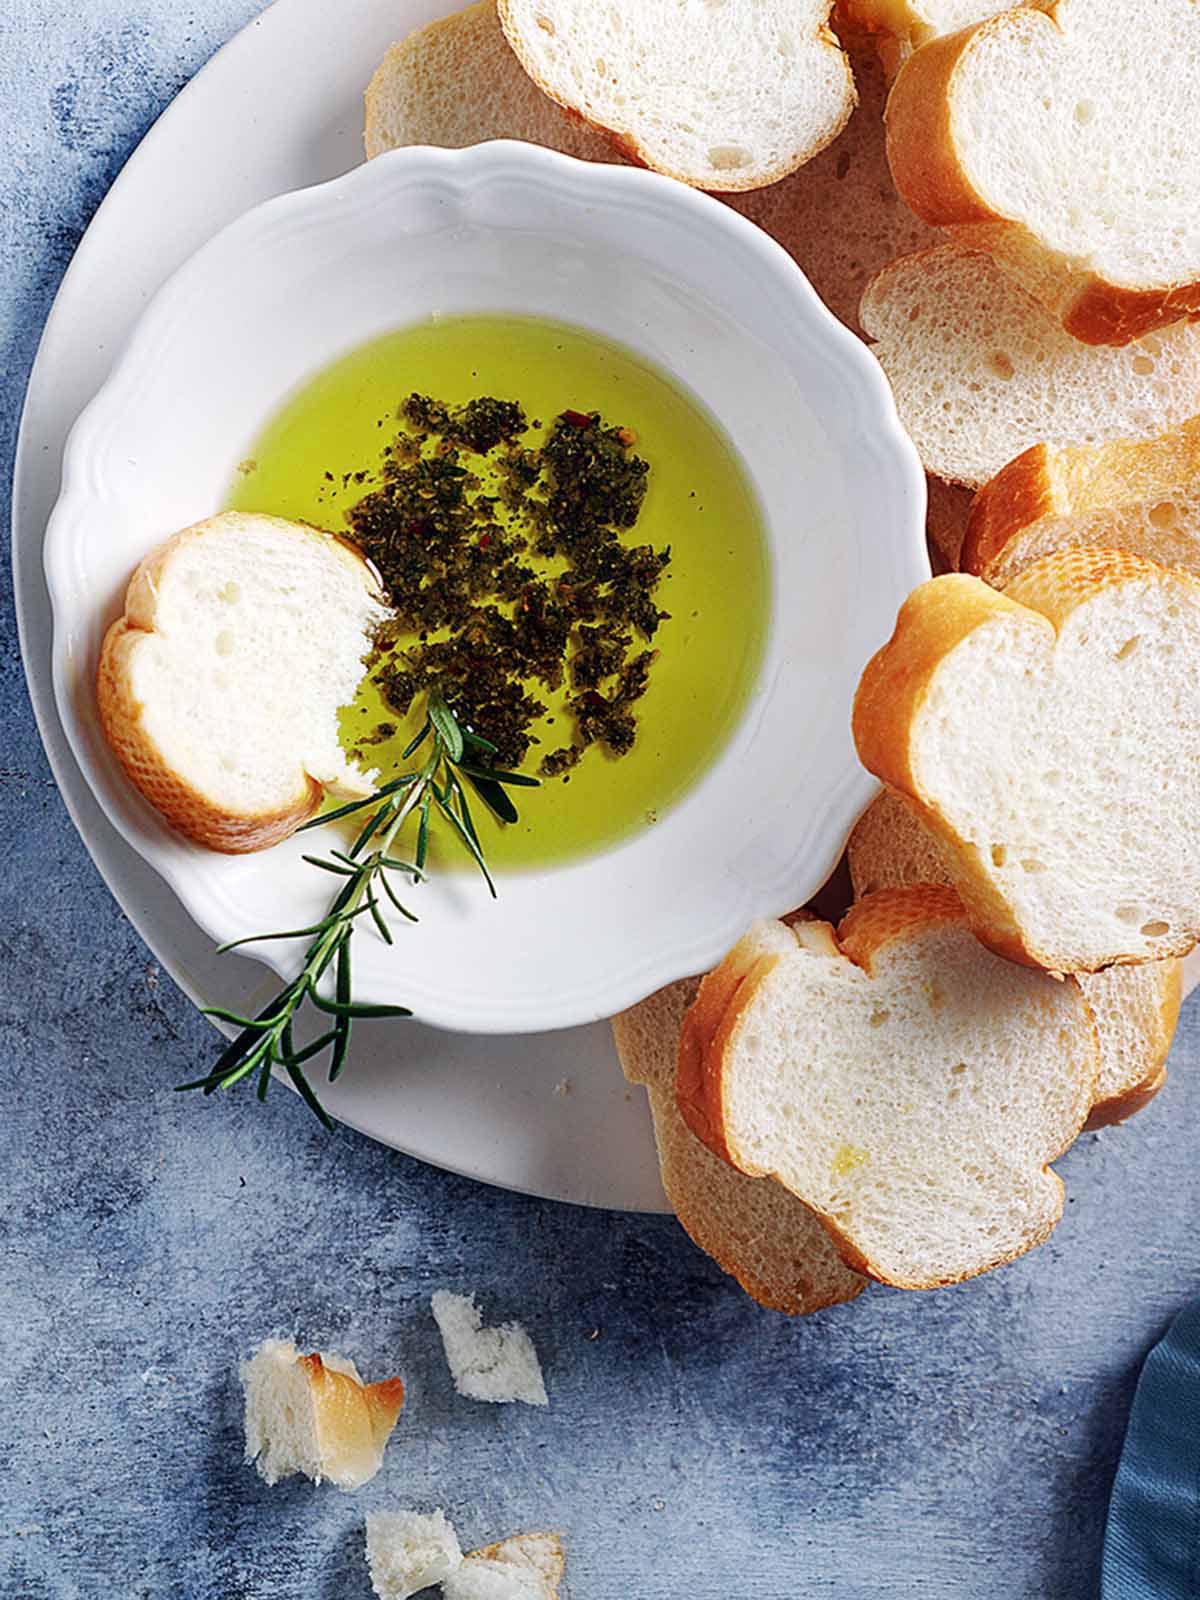 A bowl with oil and herbs and sliced bread on the side.